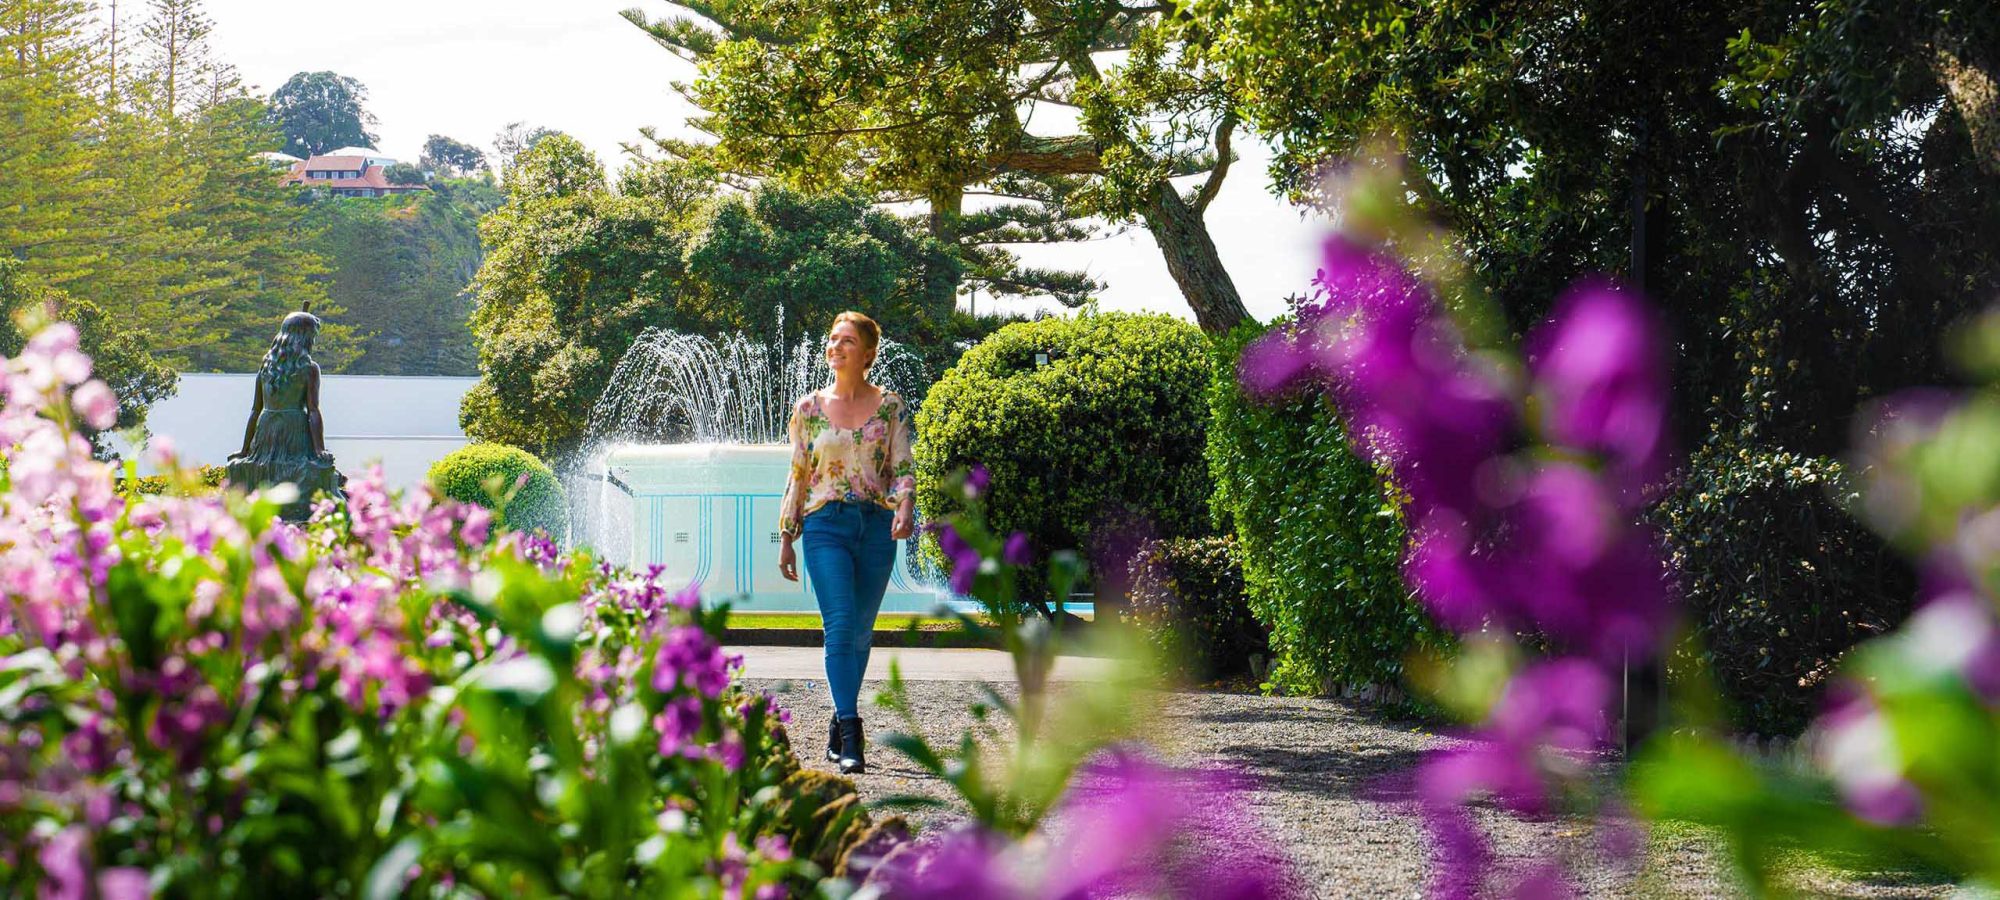 Region-Hawkes-Bay-Napier-Town-Park-Nature-People-Flowers-Fountain-Banner